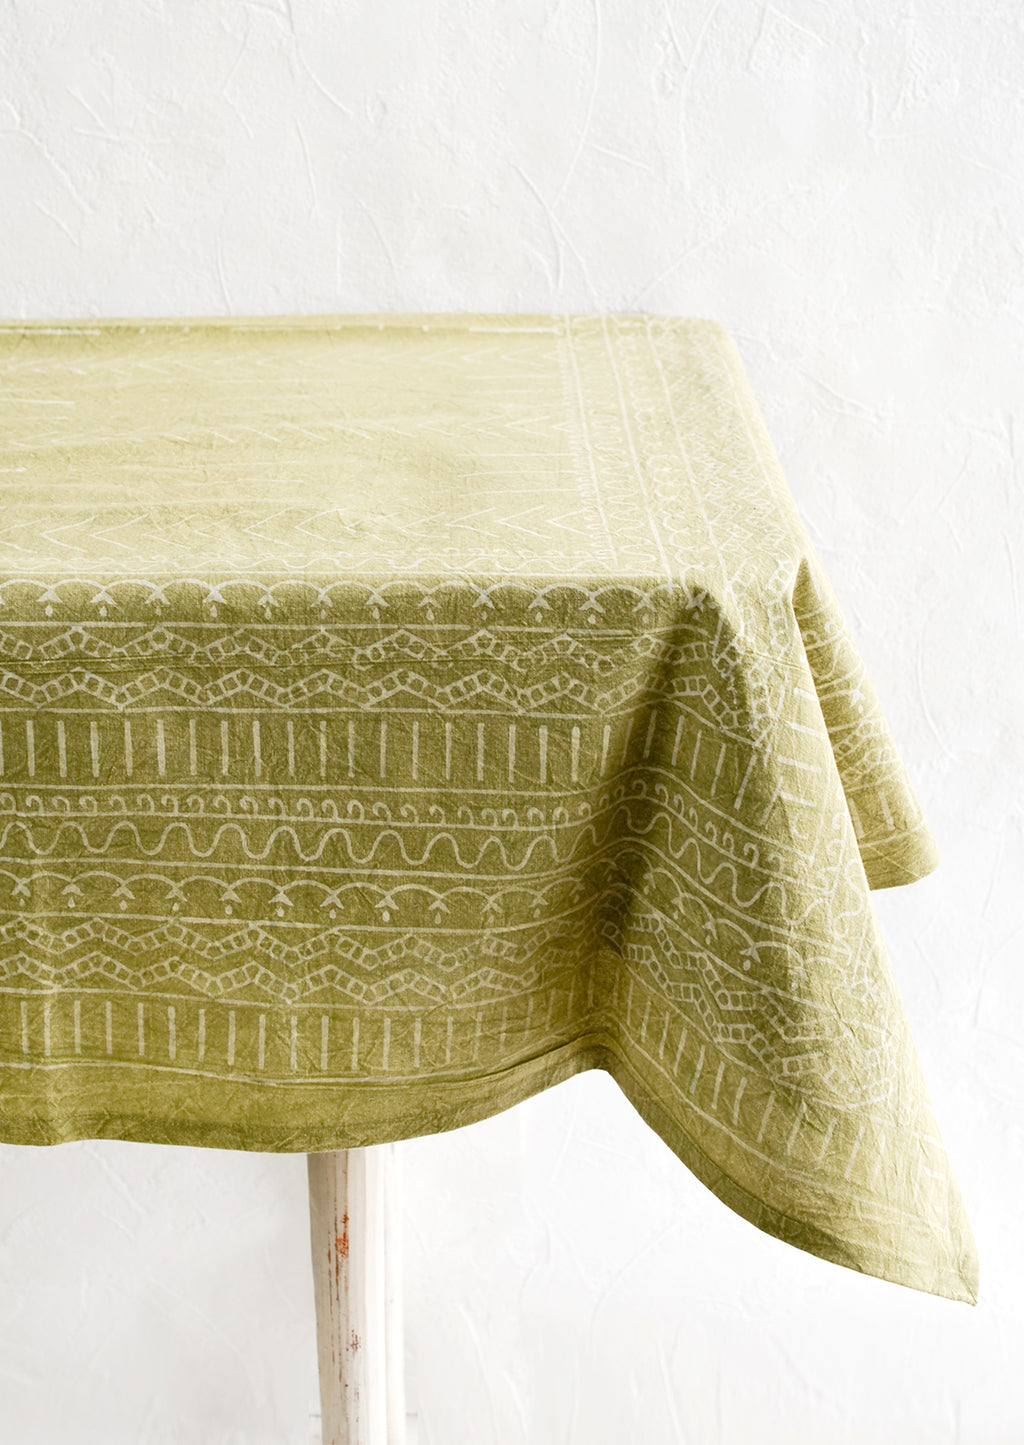 2: A green tablecloth with a white geometric print spread out over a table.